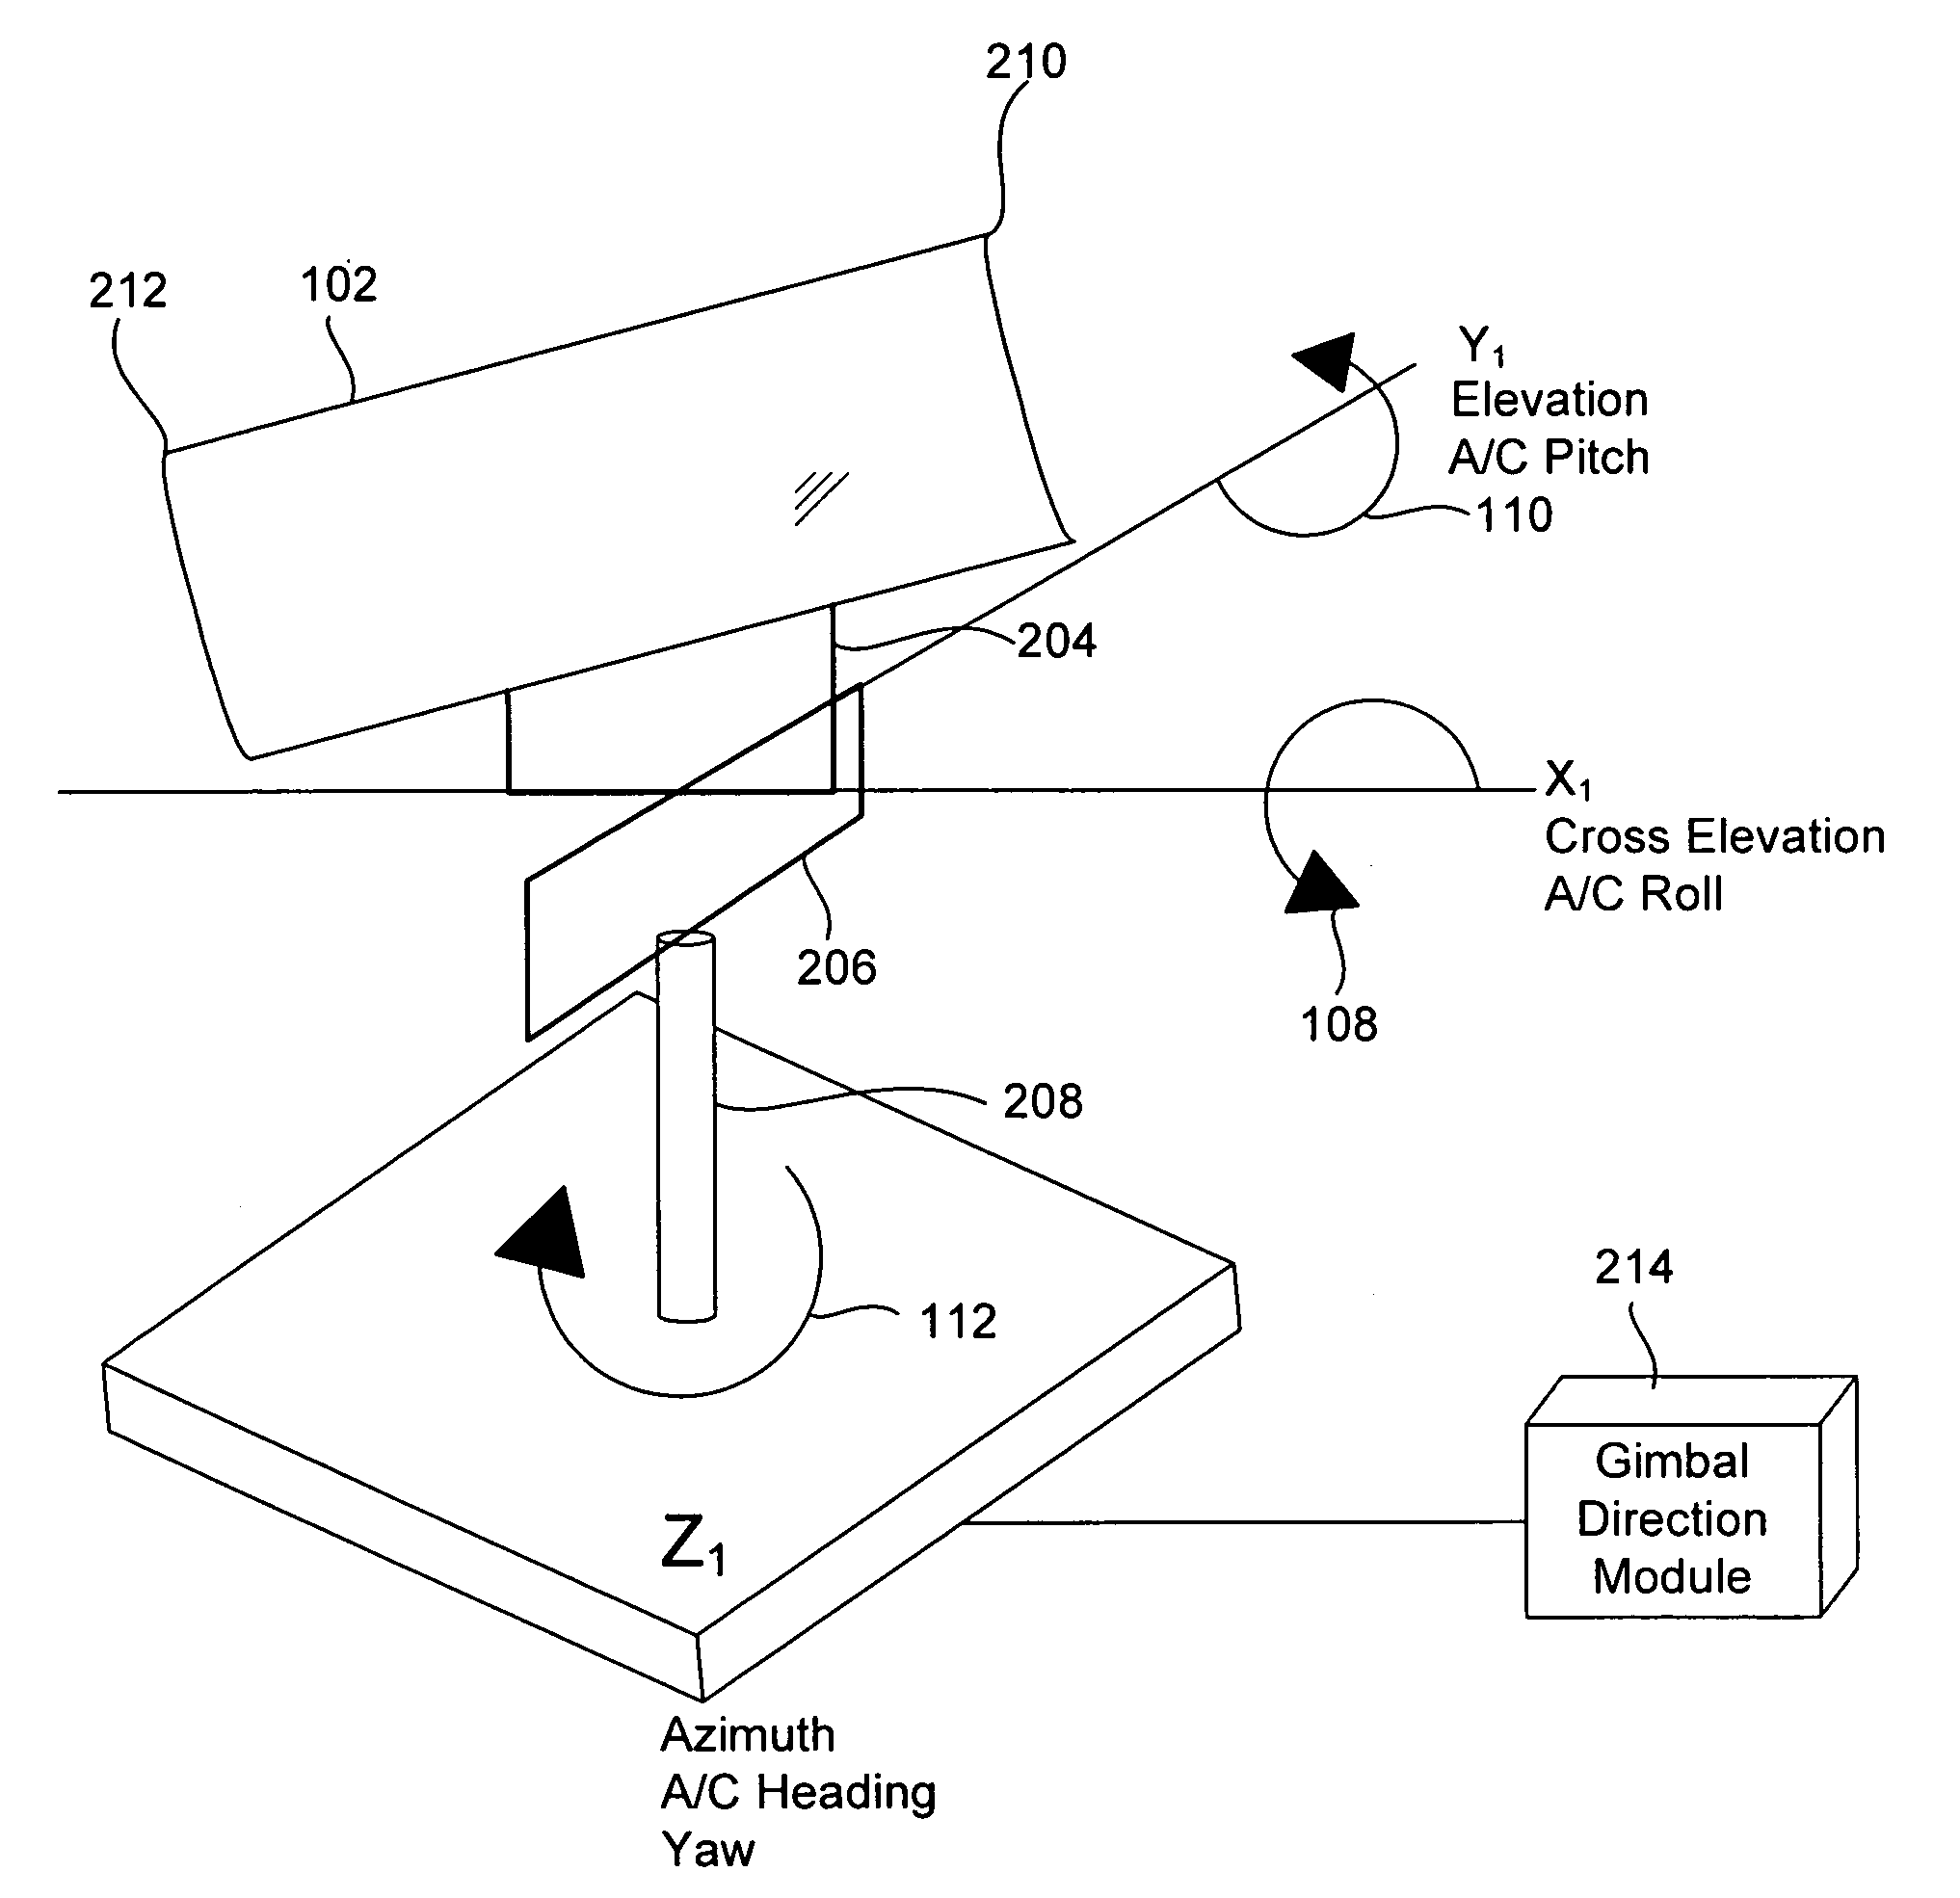 System and method for pointing and control of an antenna